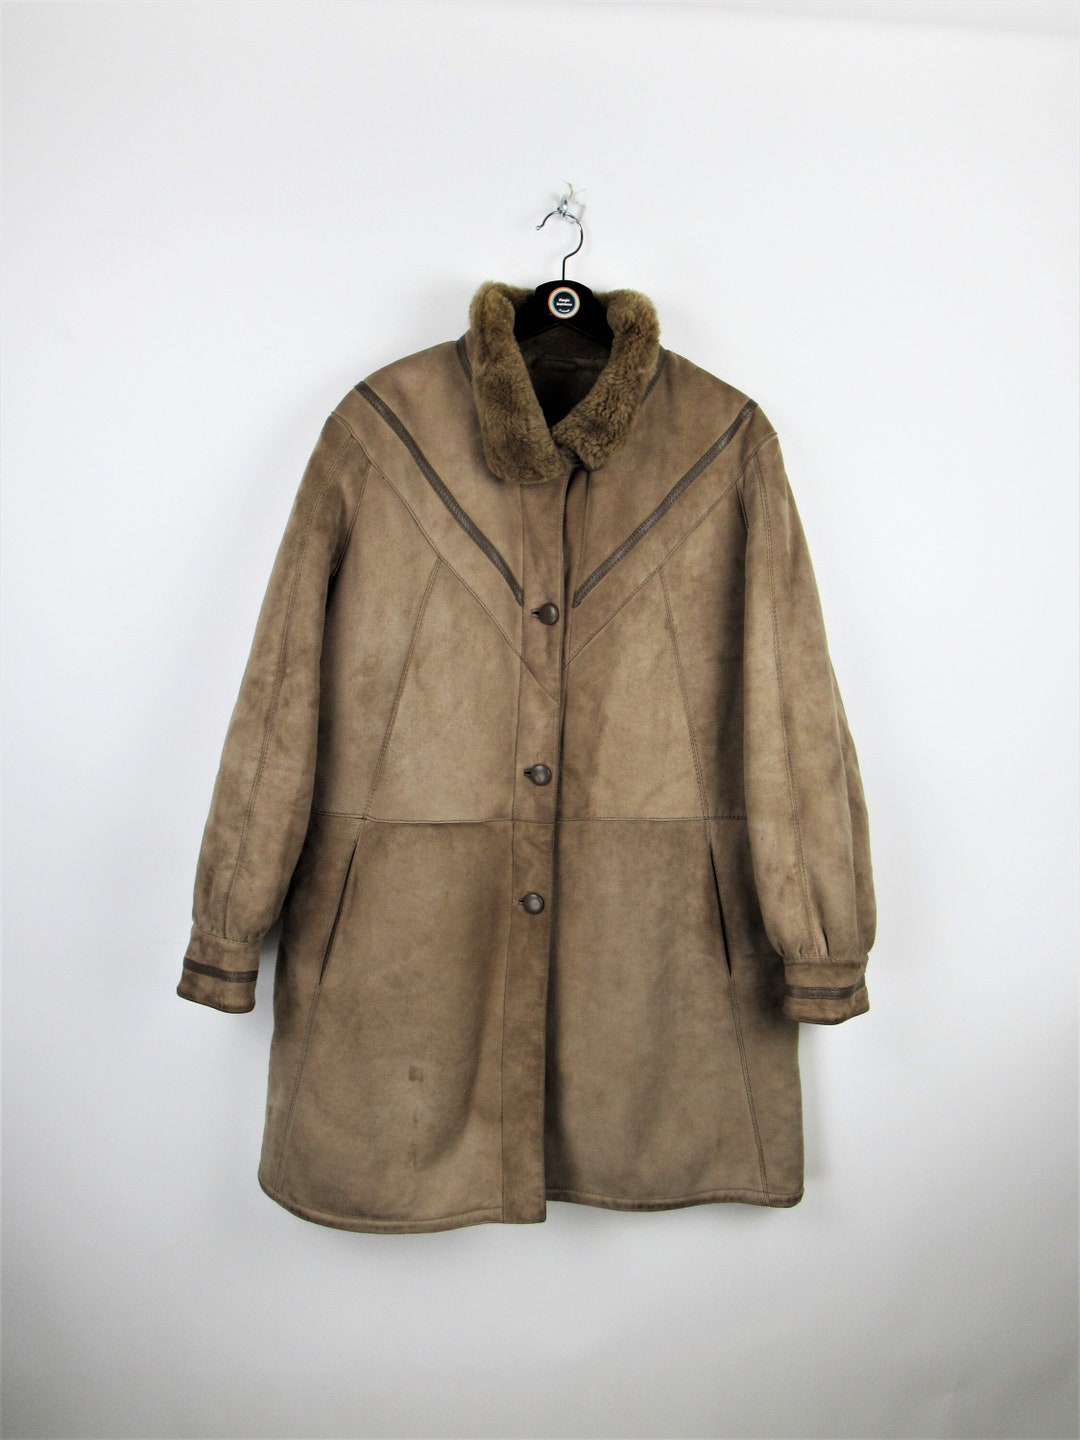 Arpel Shearling Jacket Real Suede Leather Vintage 80s 90s - Etsy